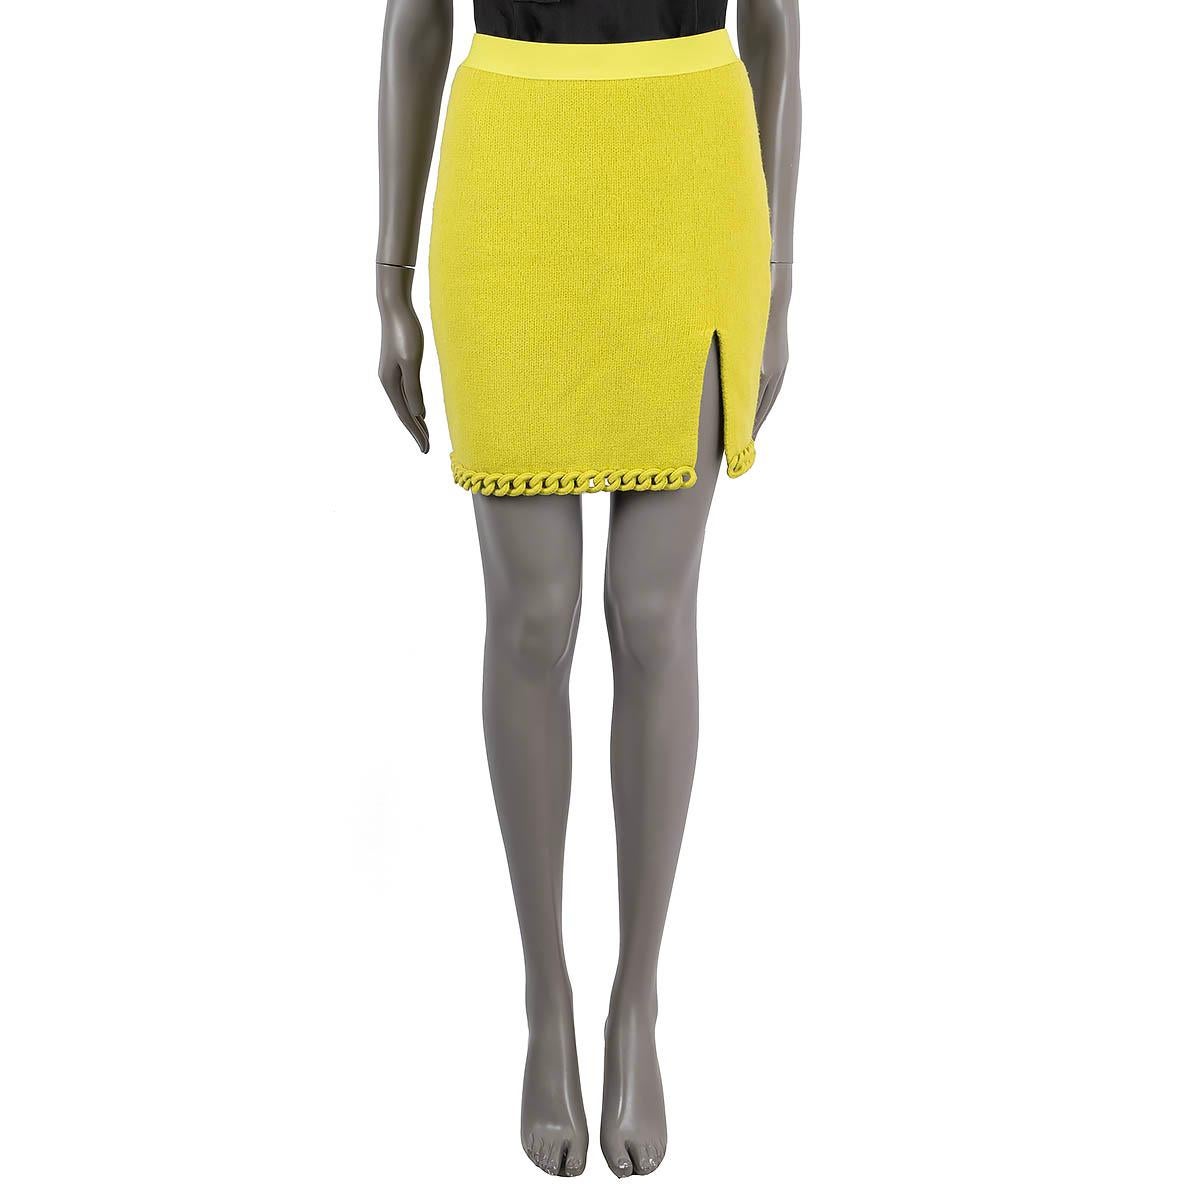 100% authentic Bottega Veneta knit skit in Kiwi (bright yellow) wool (100%). Features a chain along the bottom hem and side slit. Elastic waist band. Unlined. Has been worn and is in excellent condition.

2022 Resort

Measurements
Tag